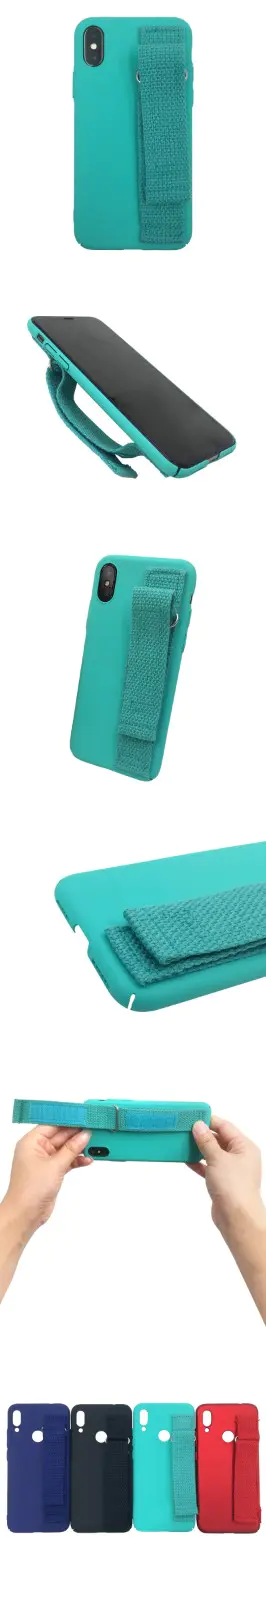 soft eco friendly phone case series for household